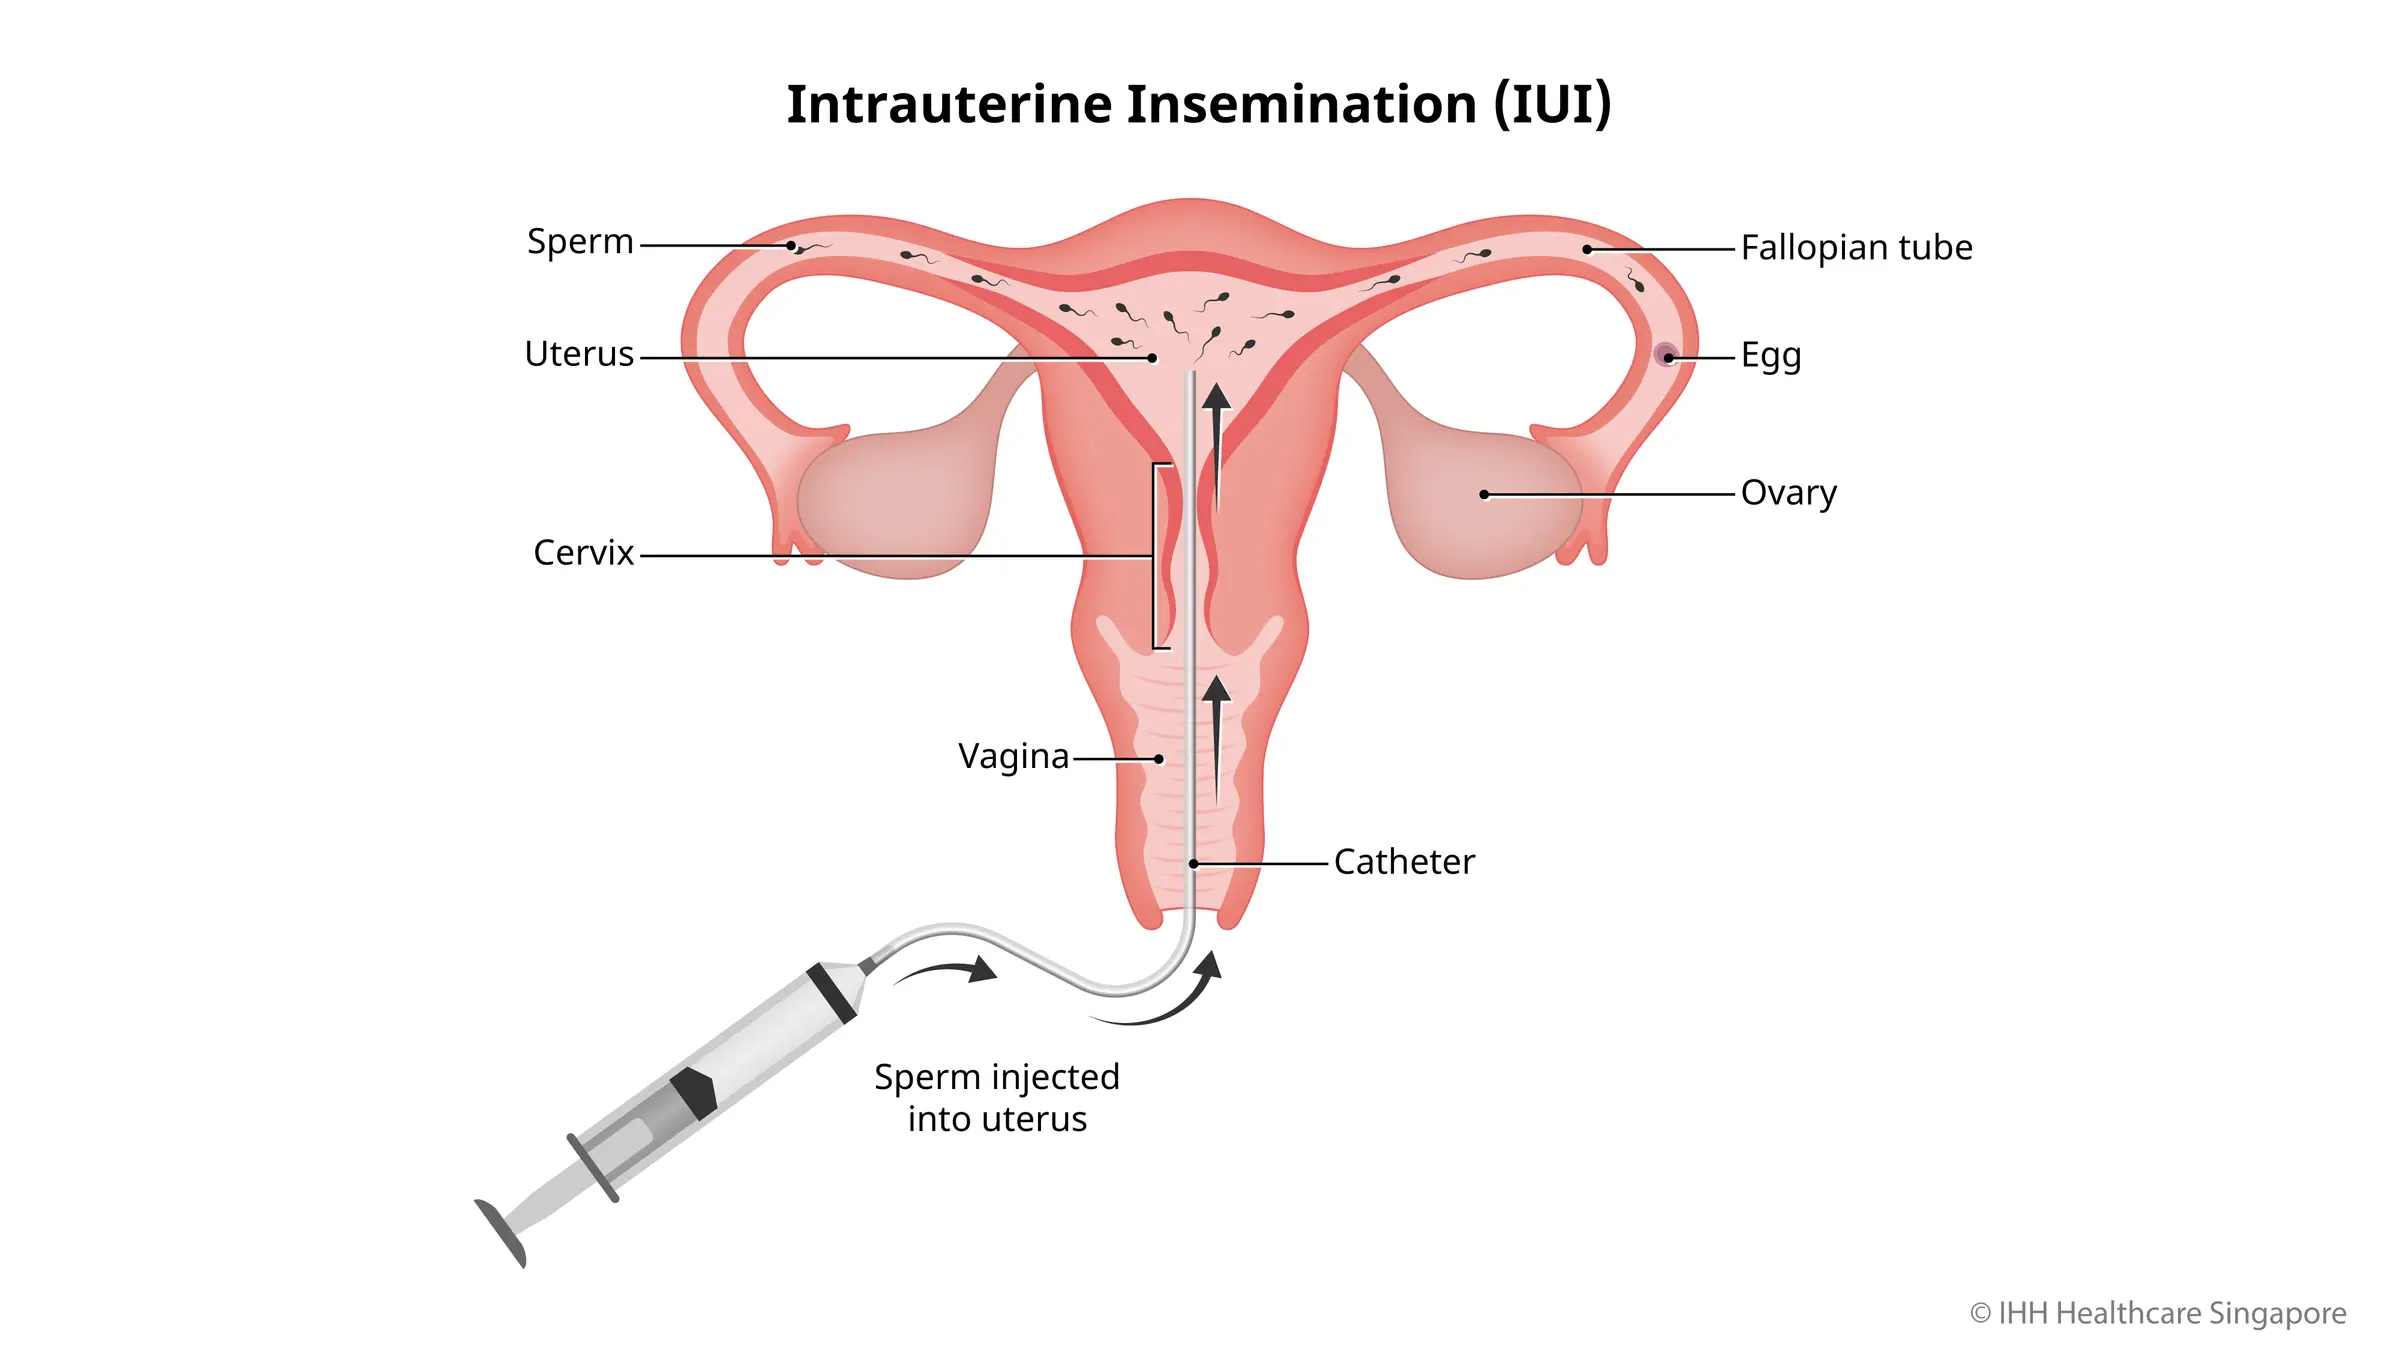 What can you expect in IUI?